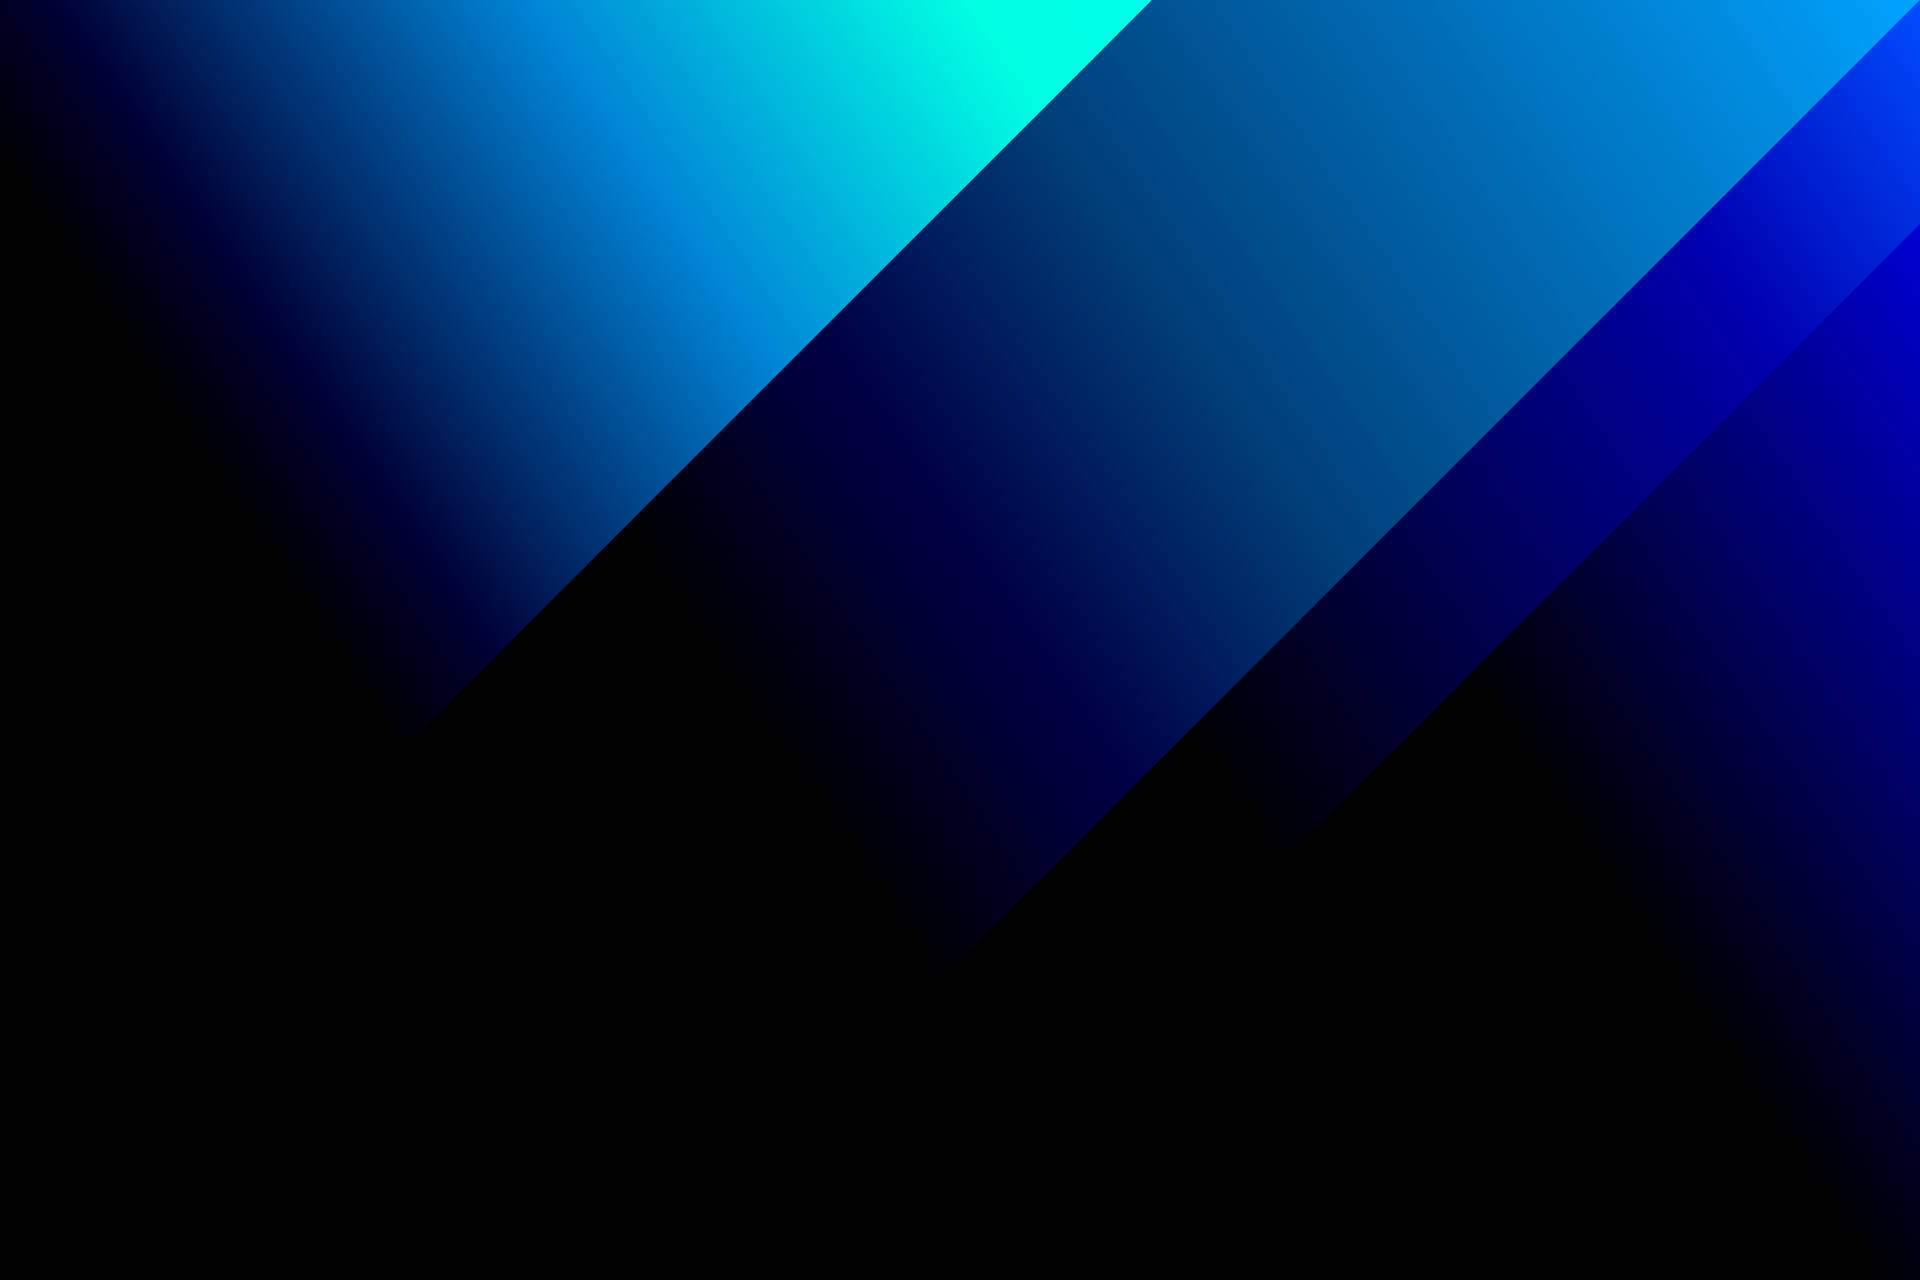 Solid Dark Blue And Black Vector